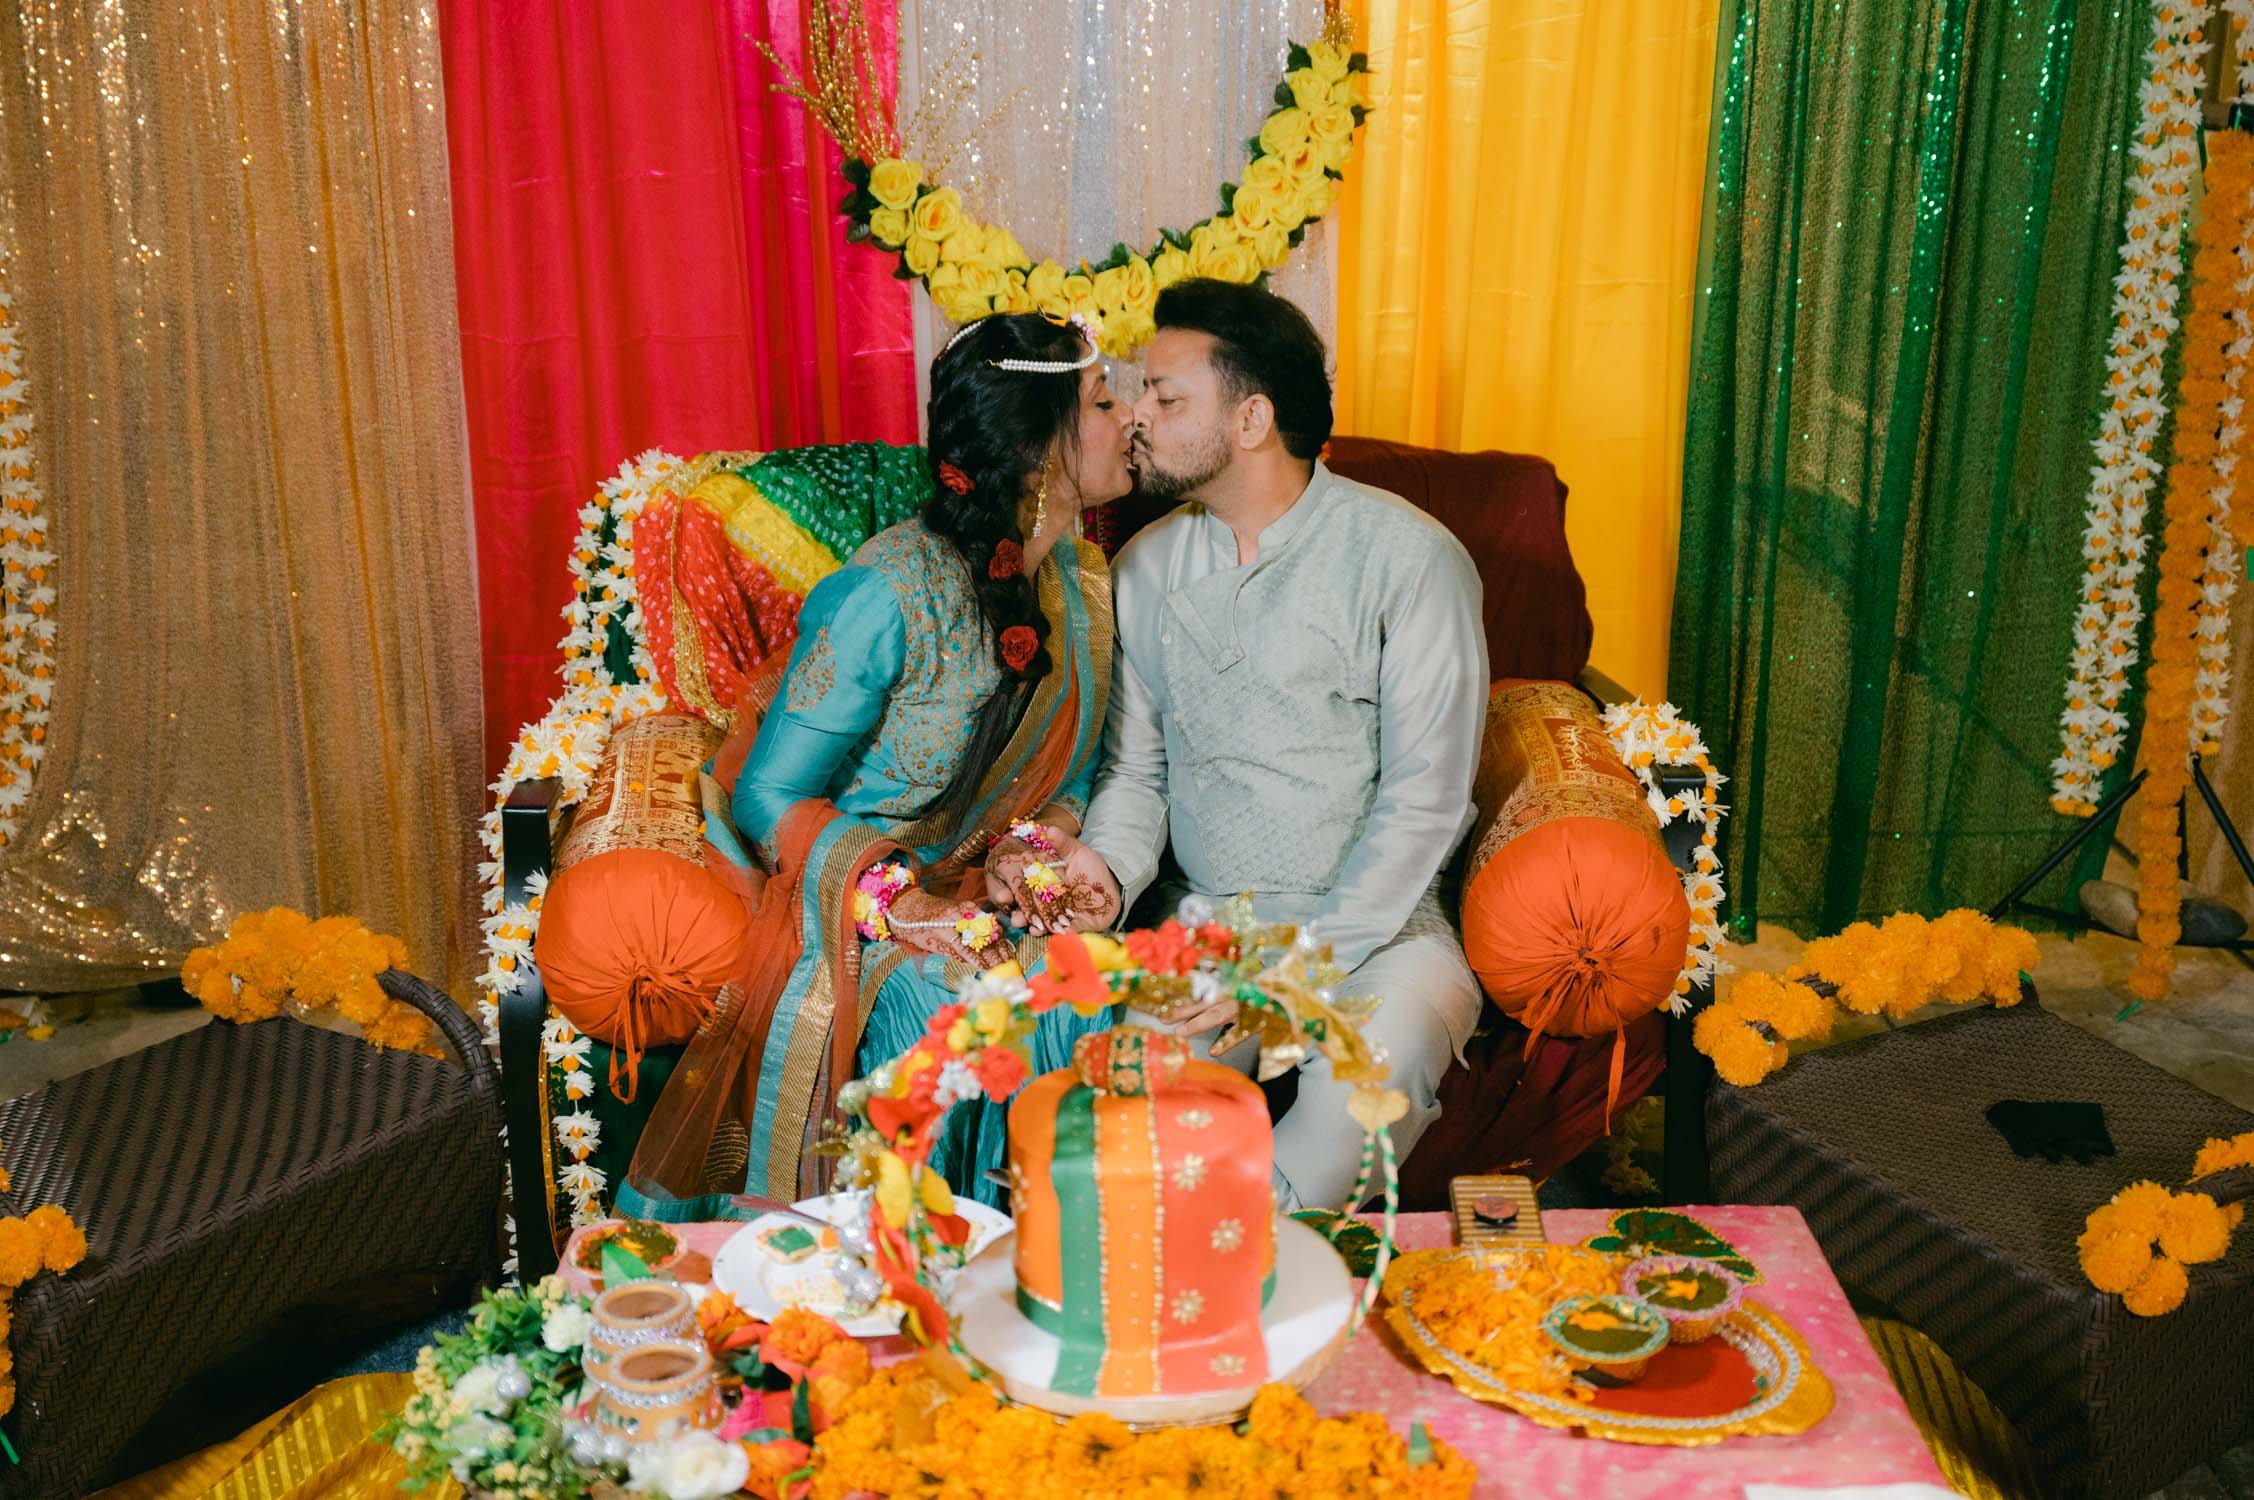 Mehendi party (Pakistani style), photo of couple kissing surrounded by their colorful decor